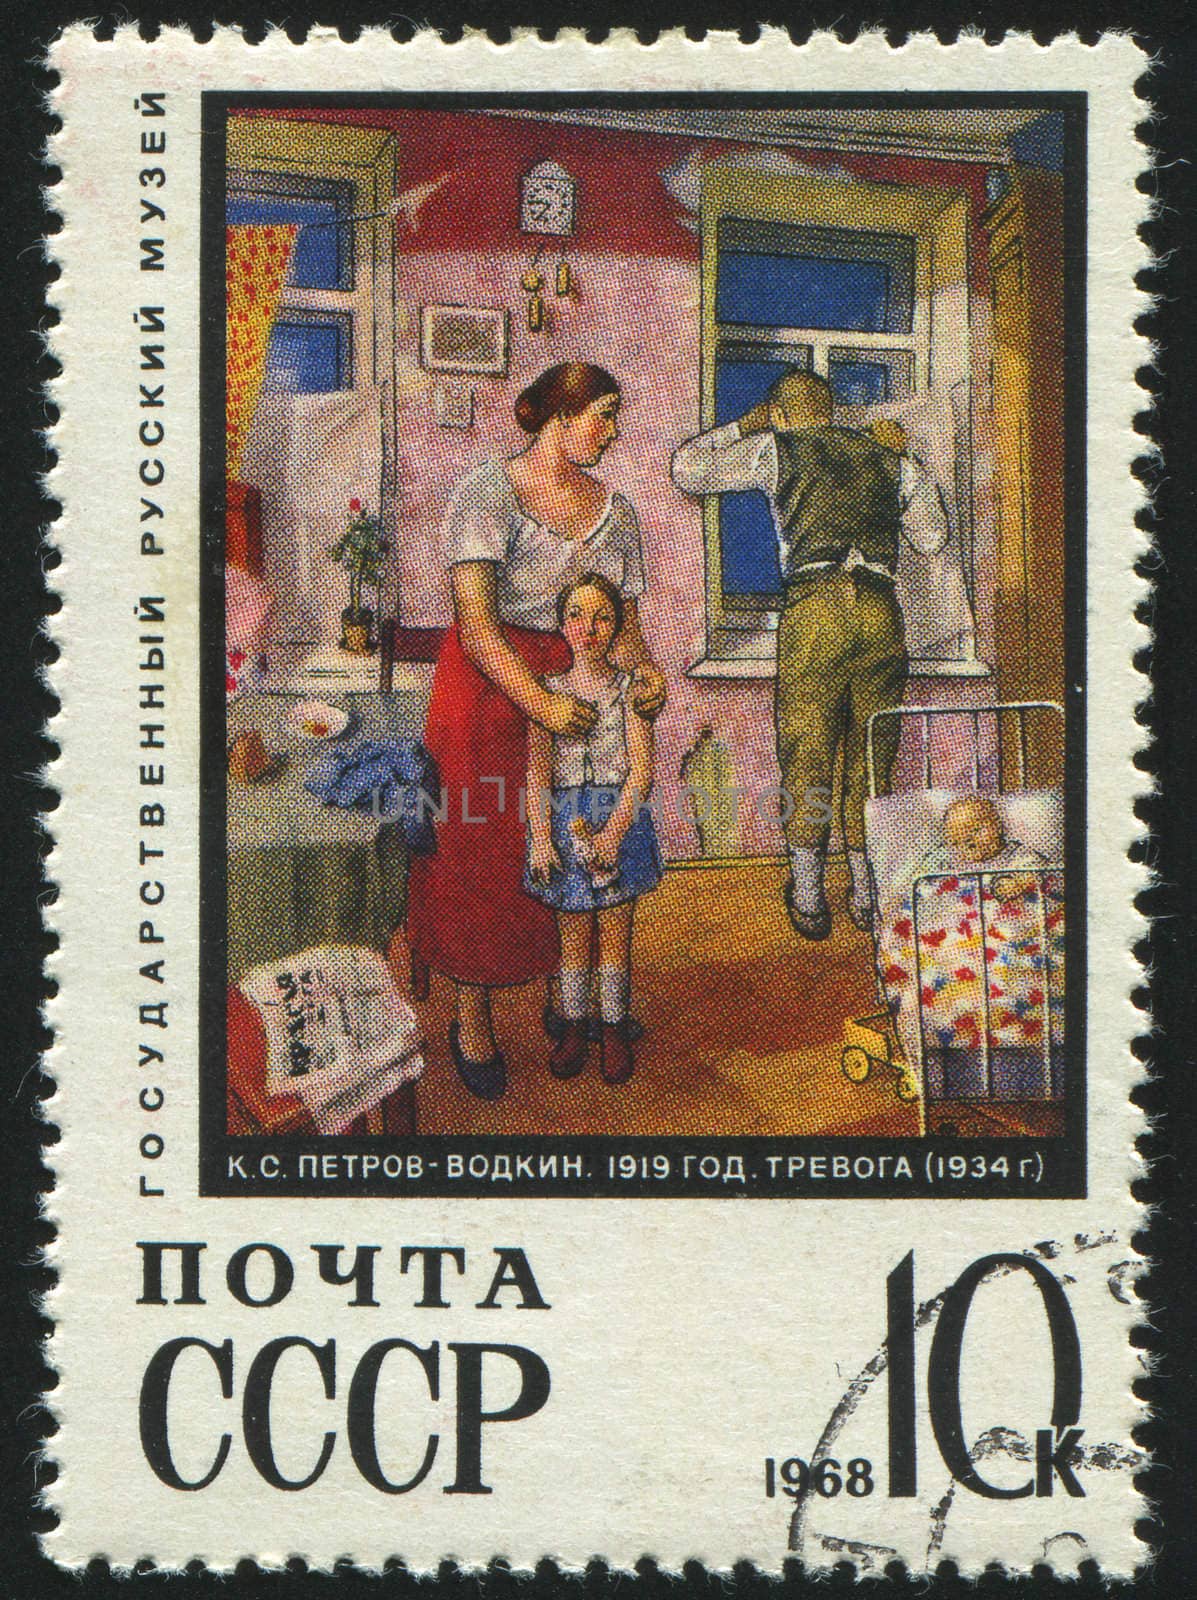 RUSSIA - CIRCA 1968: stamp printed by Russia, shows painting Alarm 1919 (family), by Petrov-Vodkin, circa 1968.